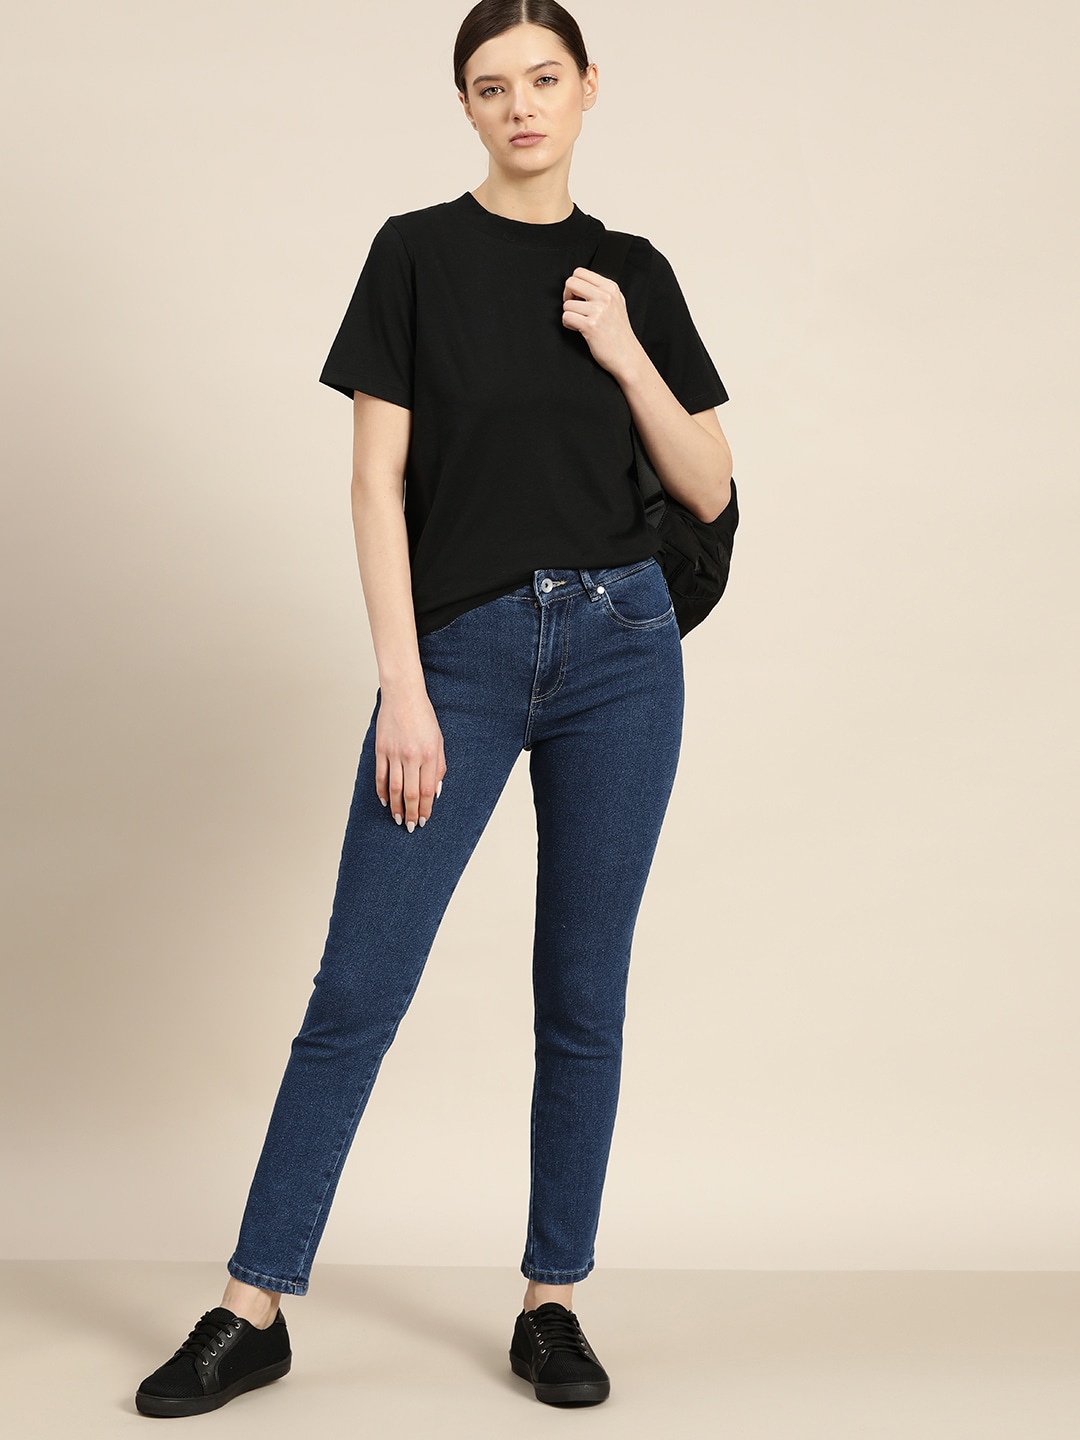 ether Women Navy Blue Slim Fit Stretchable Jeans Price in India